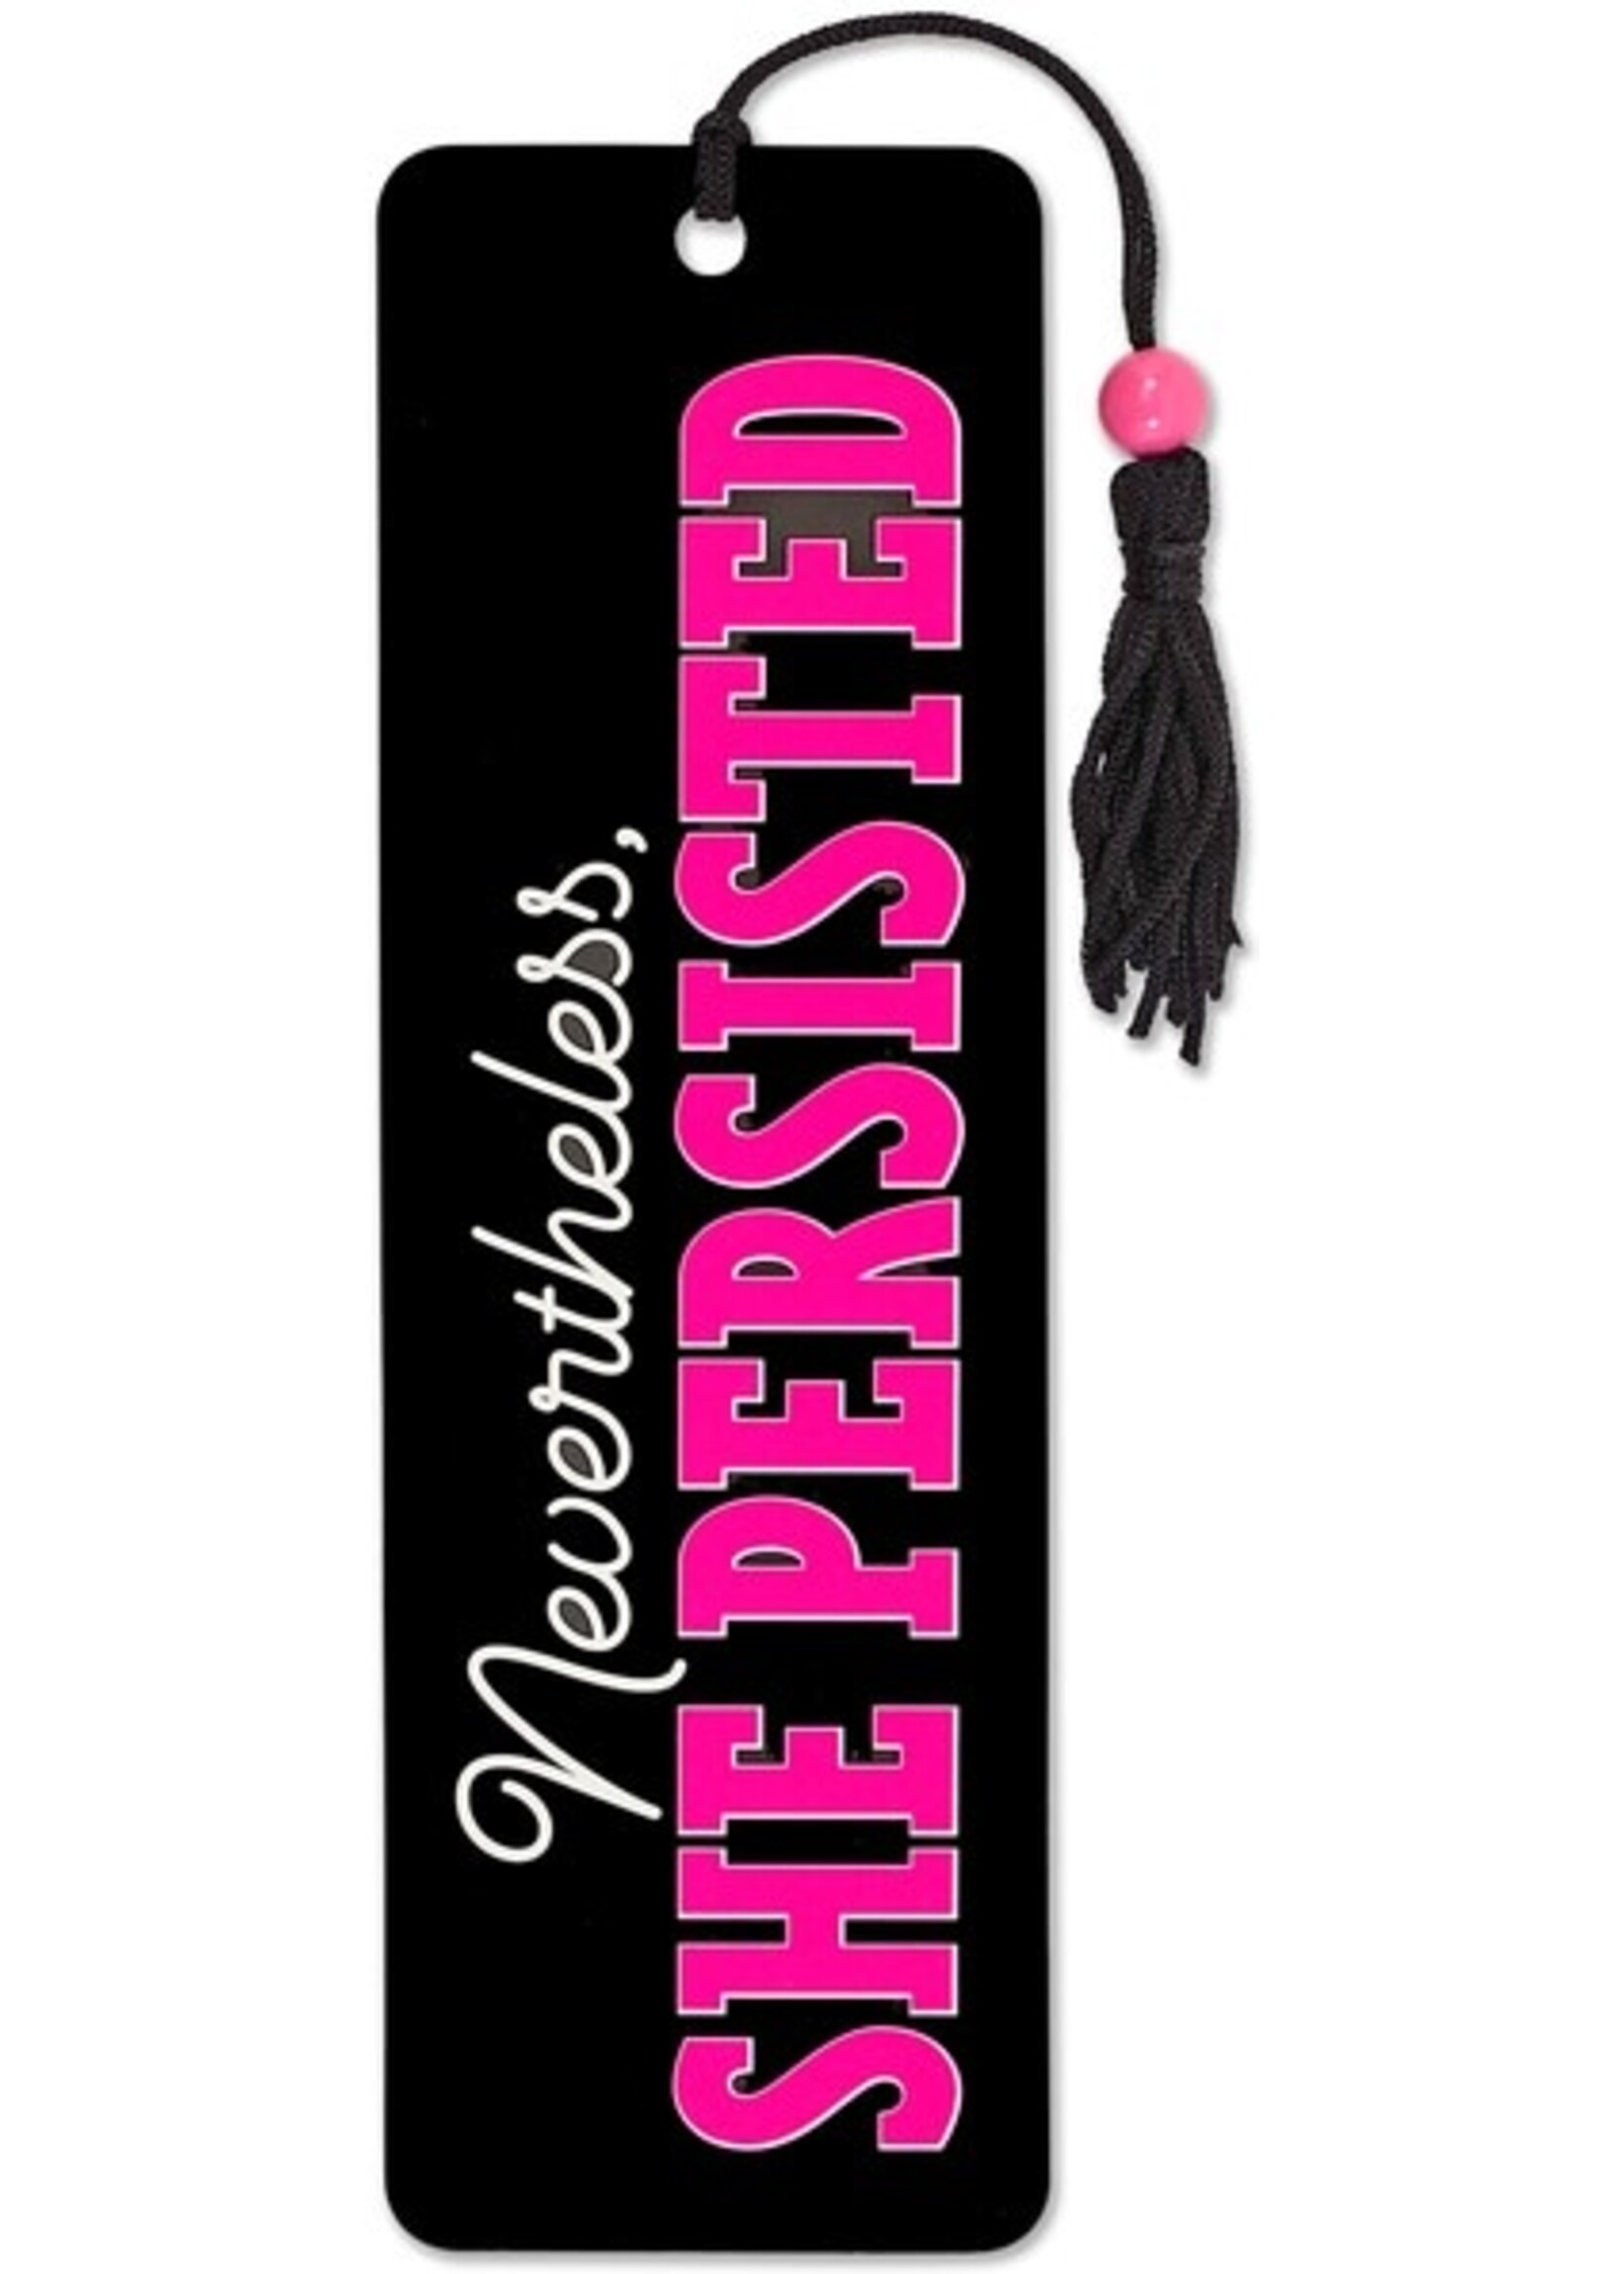 PPP BOOKMARK NEVERTHELESS, SHE PERSISTED